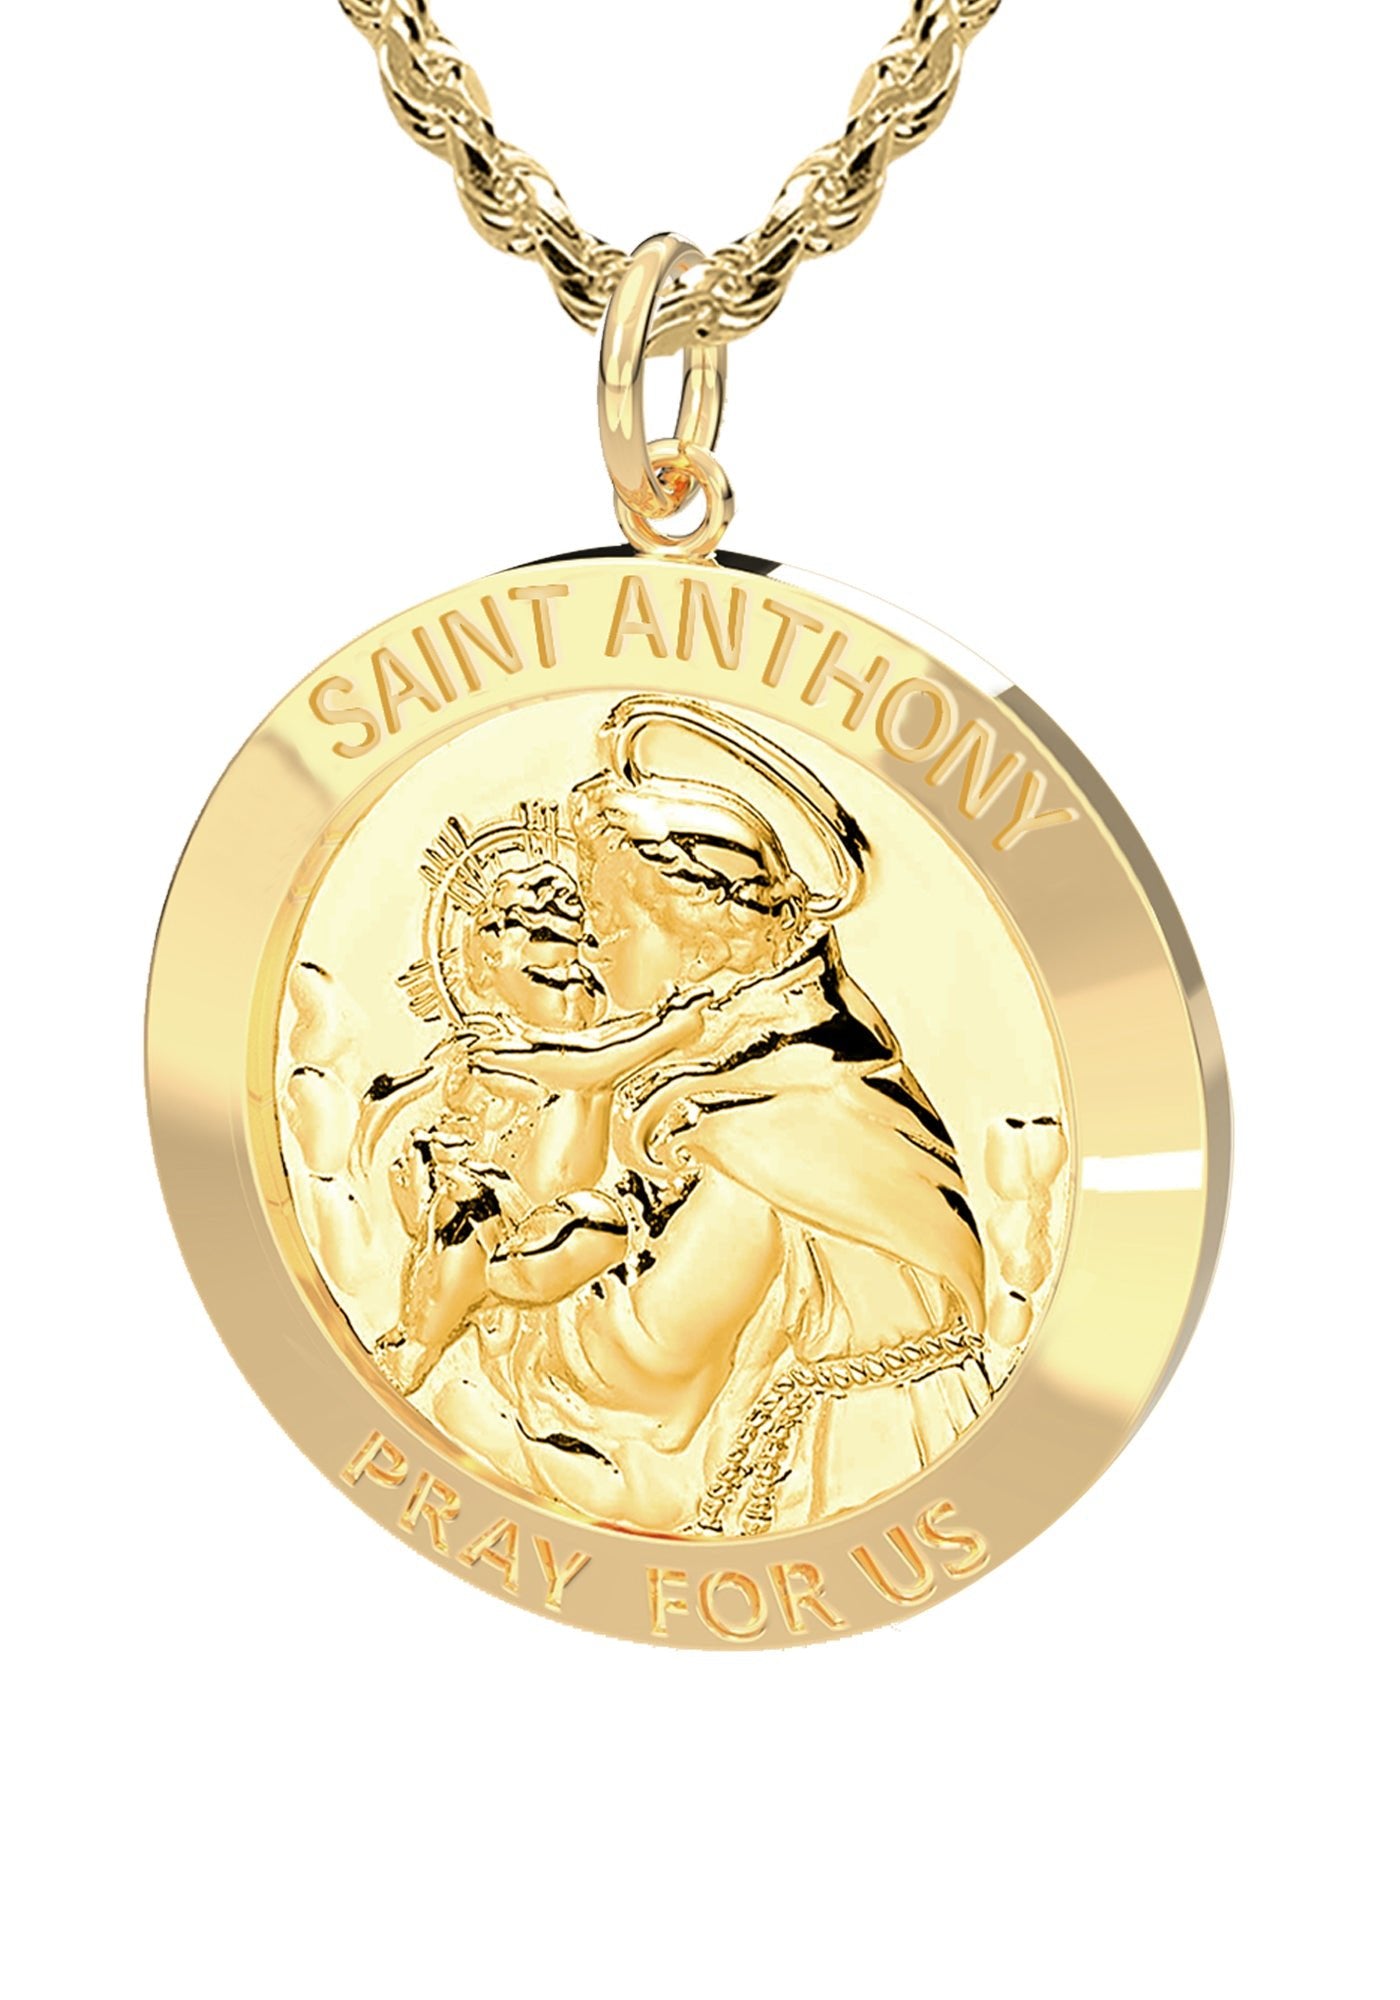 Petite Ladies 14K Yellow Gold Solid Saint Anthony Medal Pendant Necklace, 18mm - US Jewels